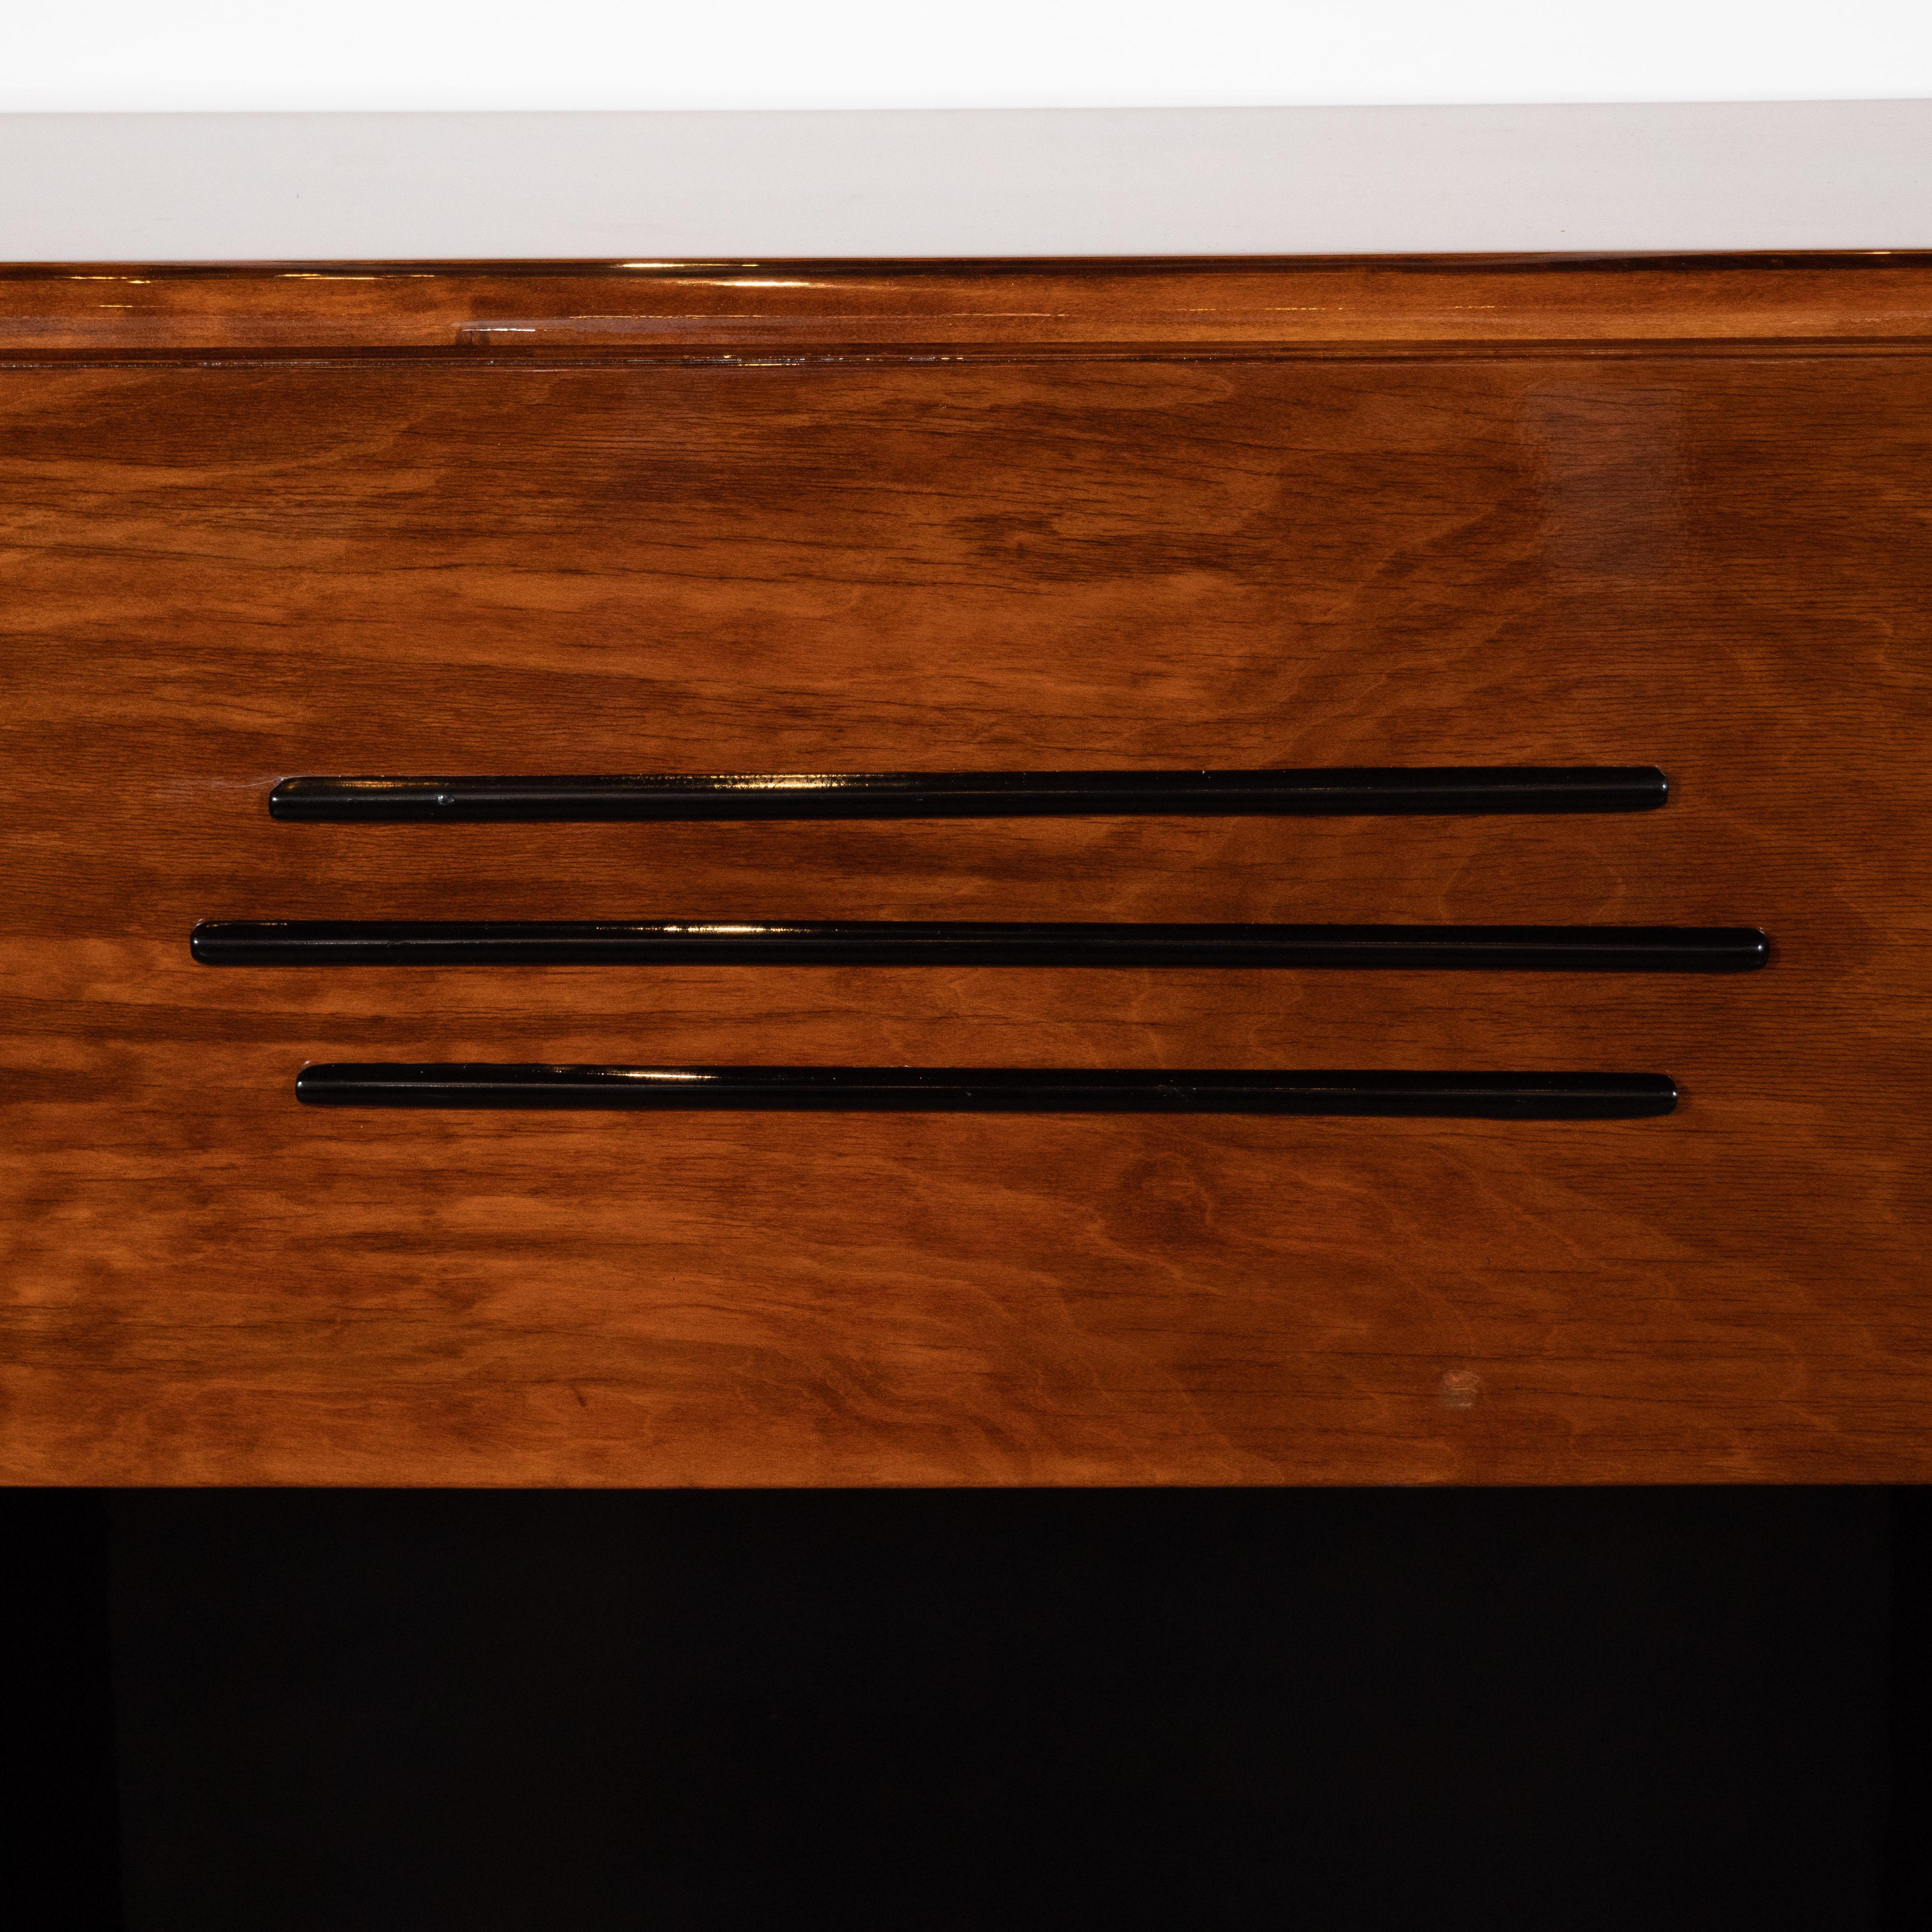 This elegant Art Deco Machine Age streamlined fireplace was realized in the United States, circa 1935. It features a rectilinear body, realized in bookmatched walnut with a black lacquer interior and inset sides in the same material with banded